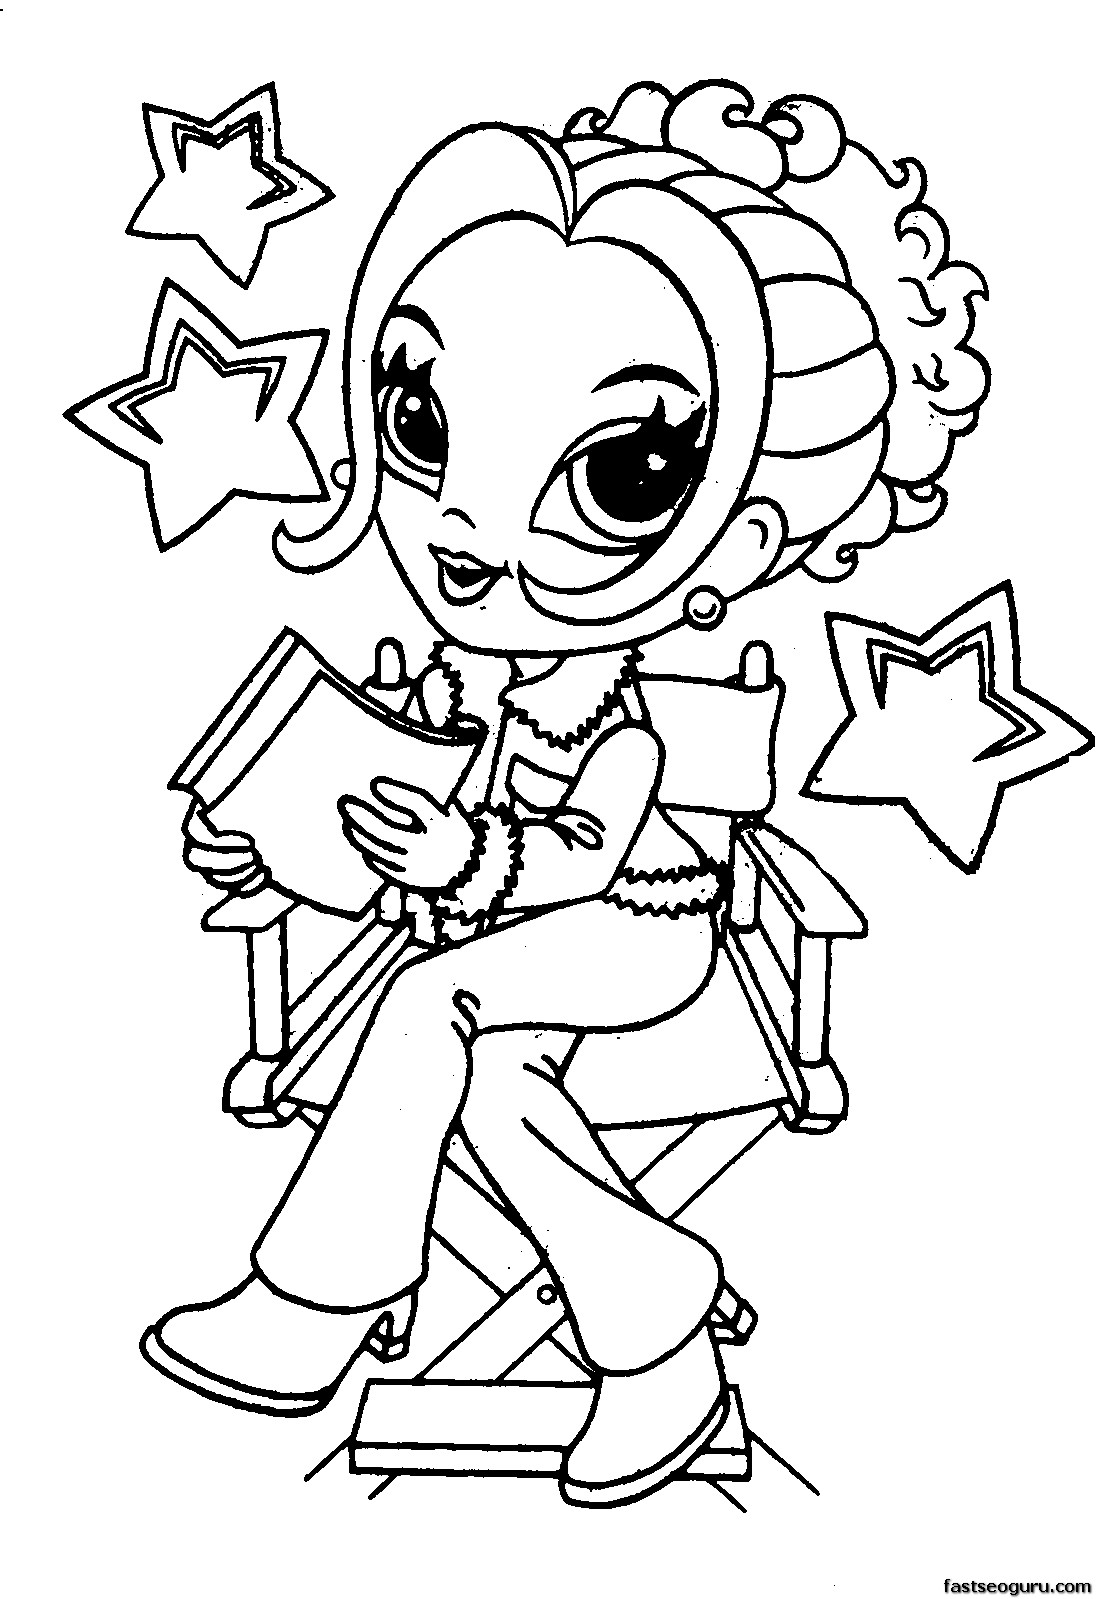 a frank coloring pages - photo #8